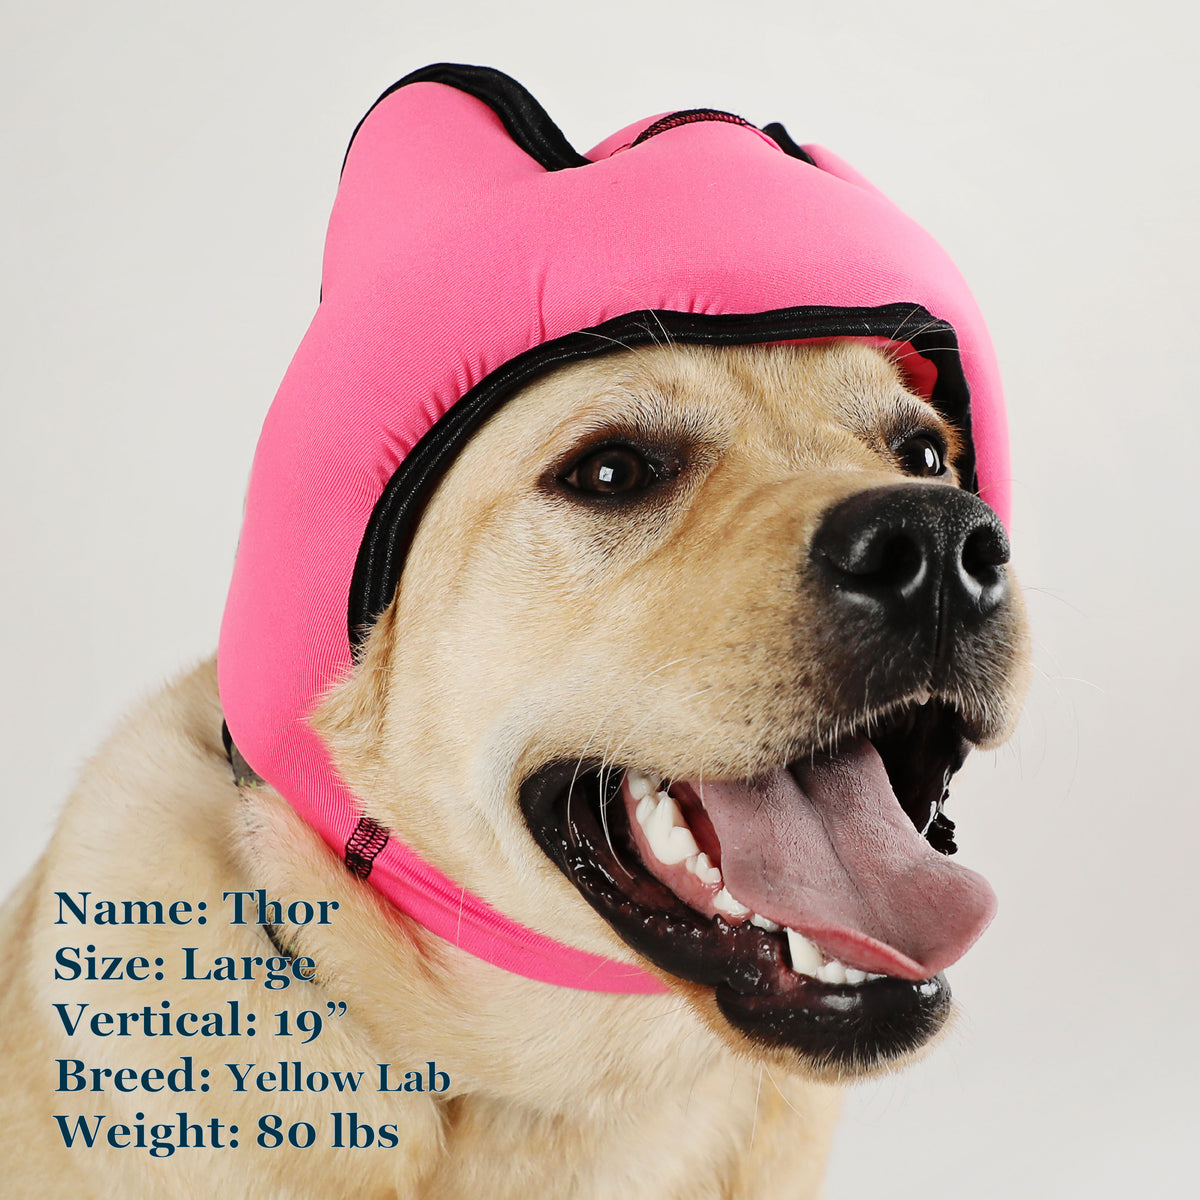 Thor is a Lab in a Large Pink PAWNIX Noise Cancelling Headset for dogs